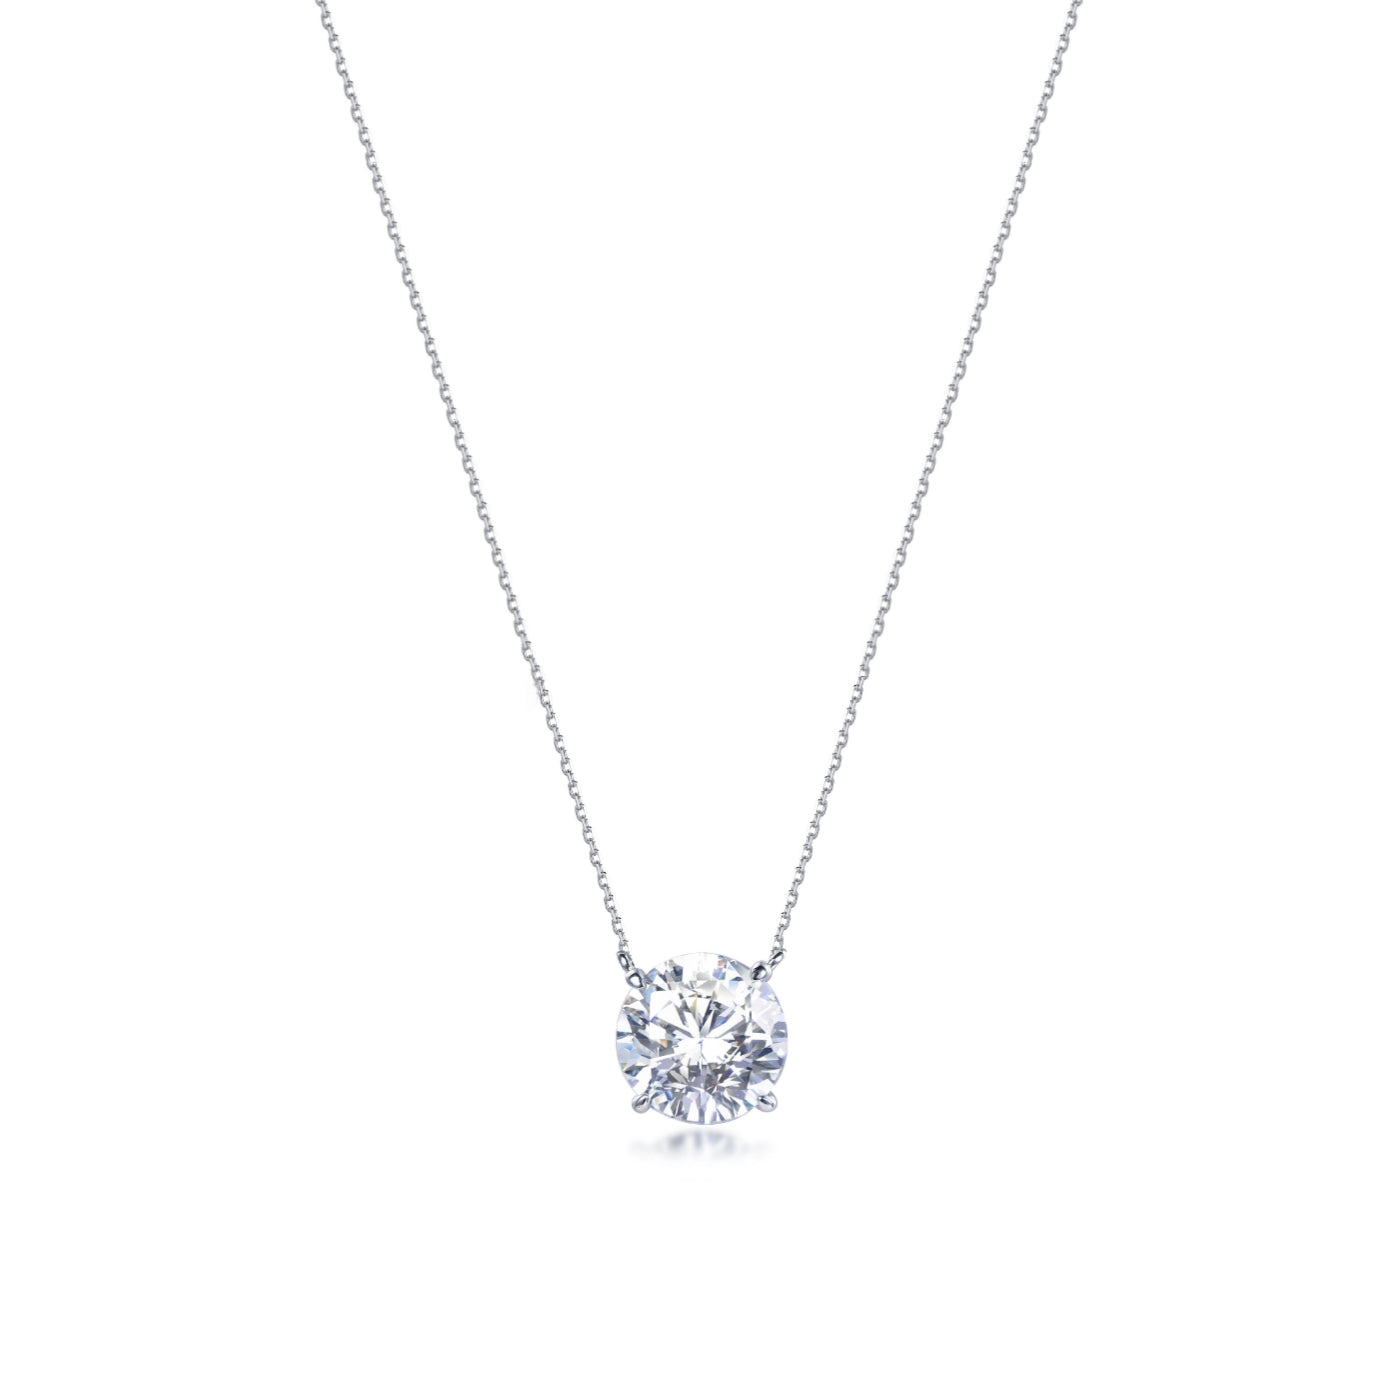 Rhodium Plated Sterling Silver CZ Solitaire Necklace